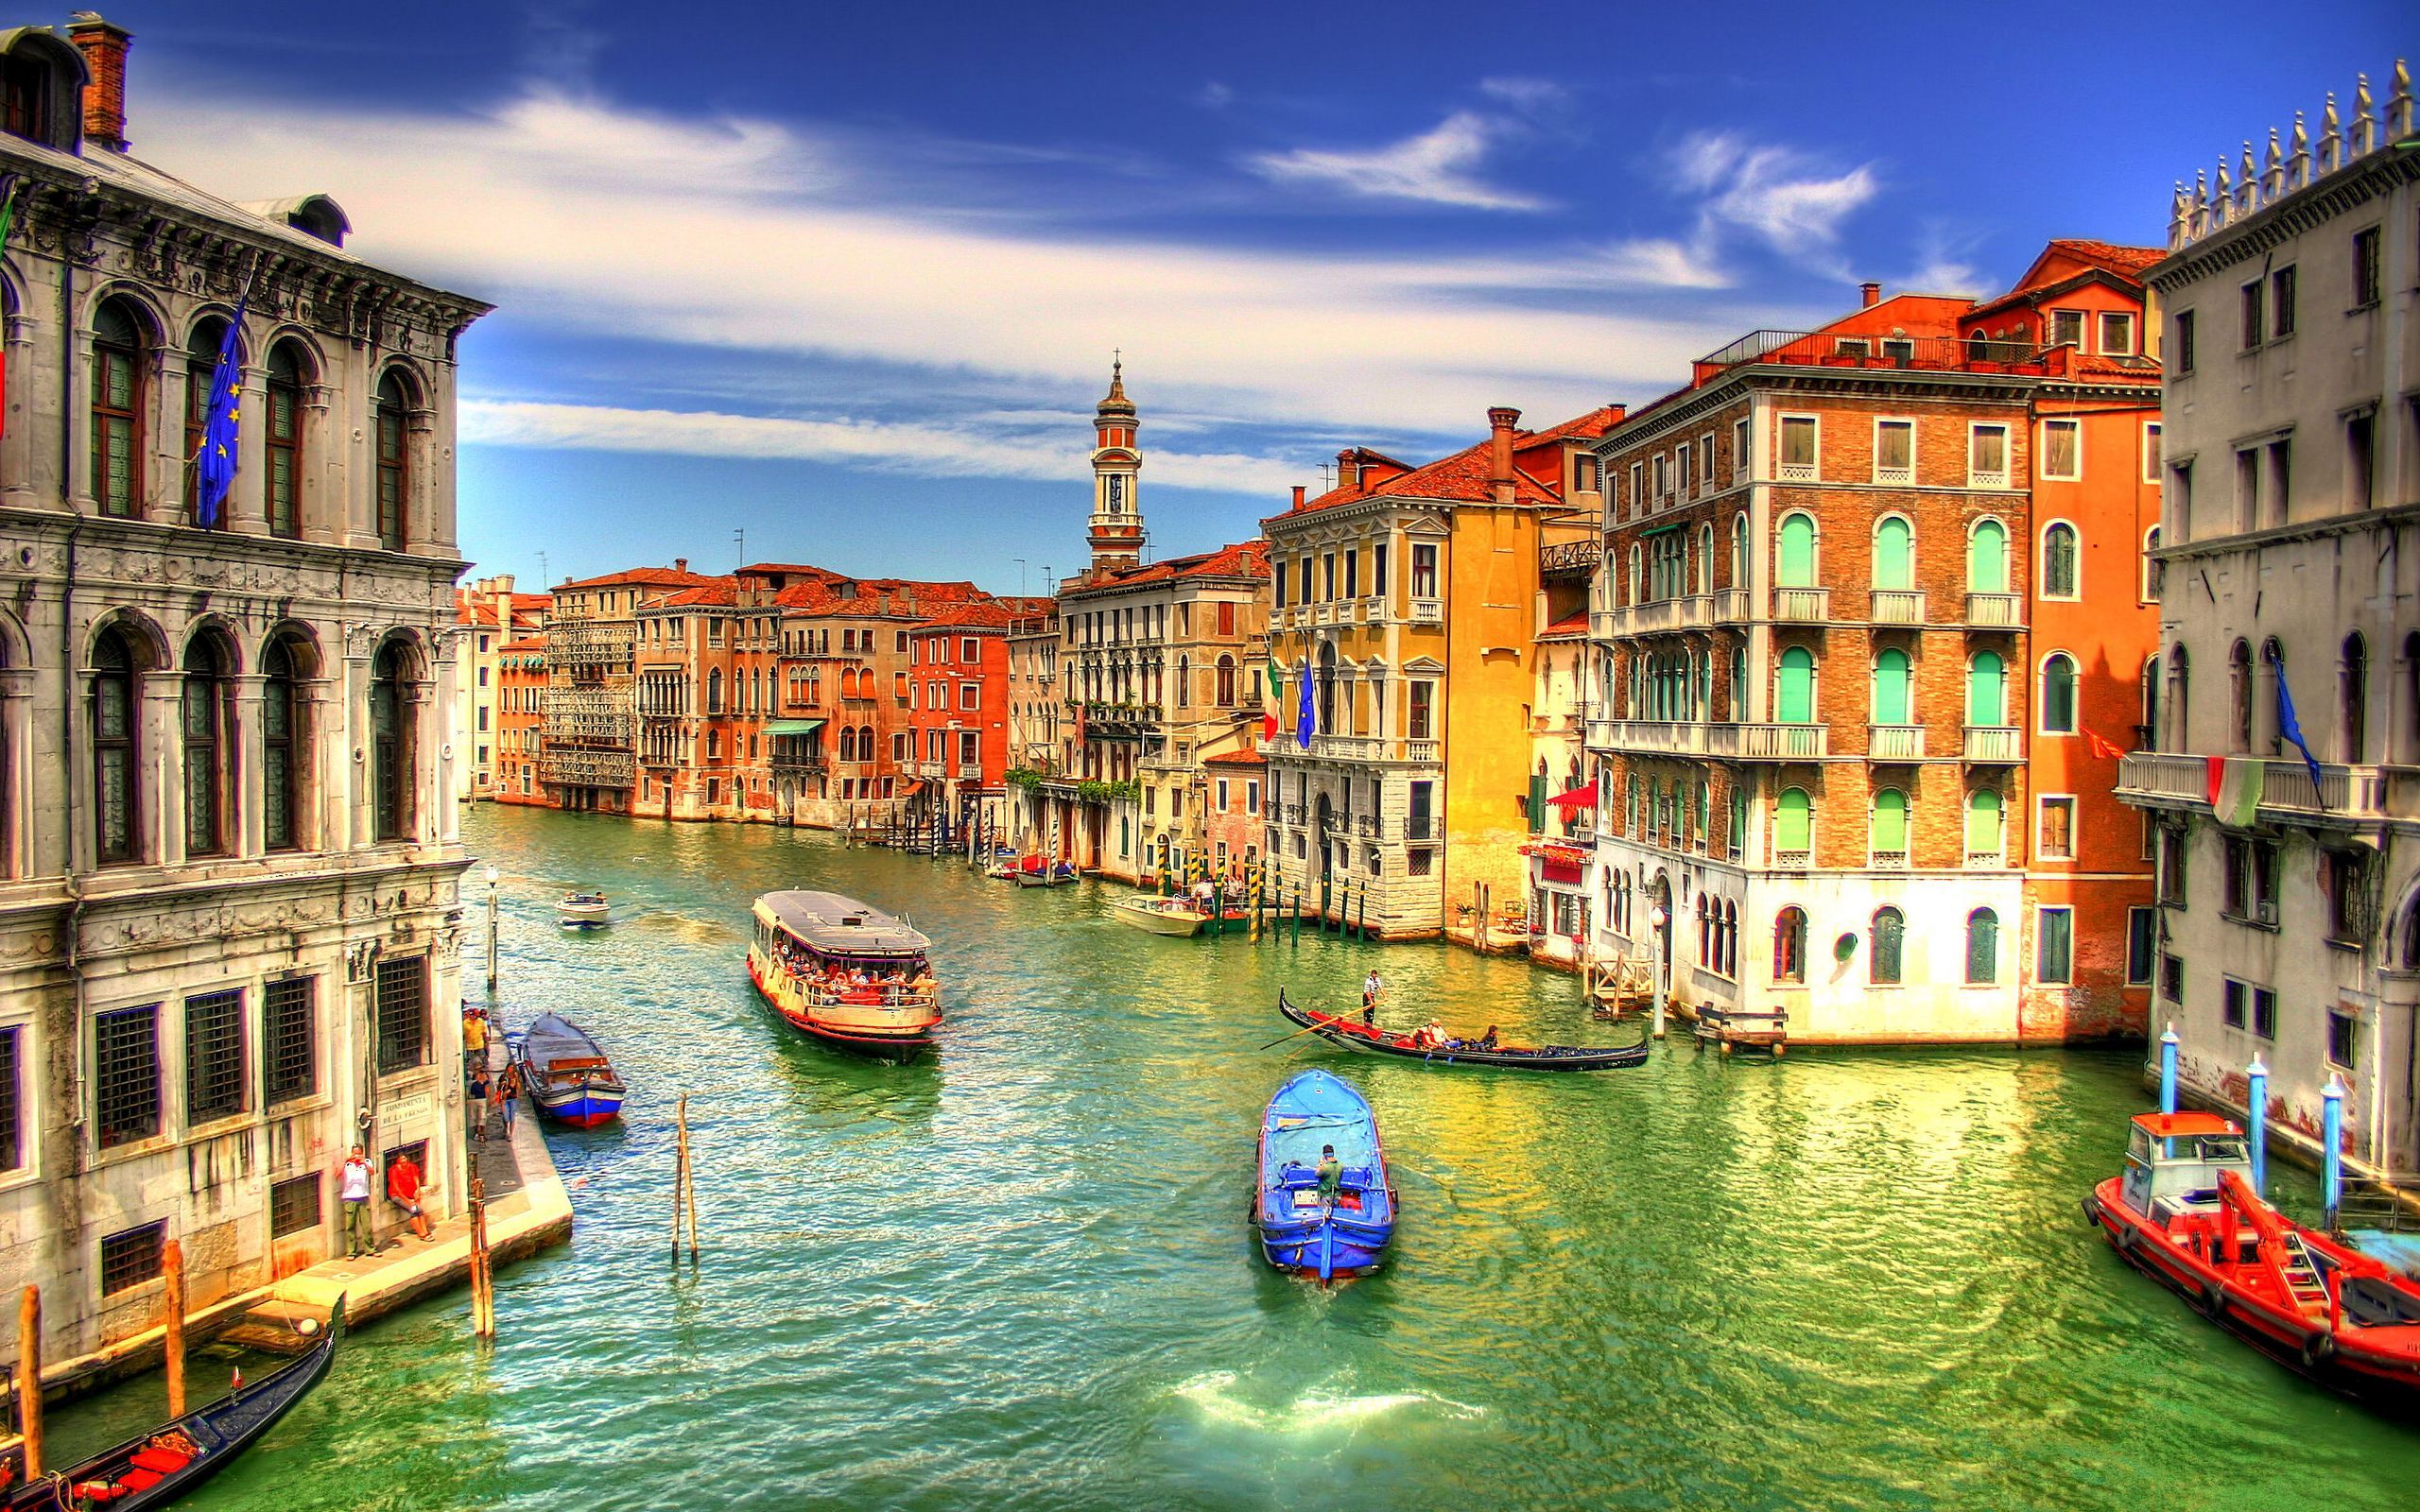 Venice Italy Wallpapers   2560x1600   961827 2560x1600